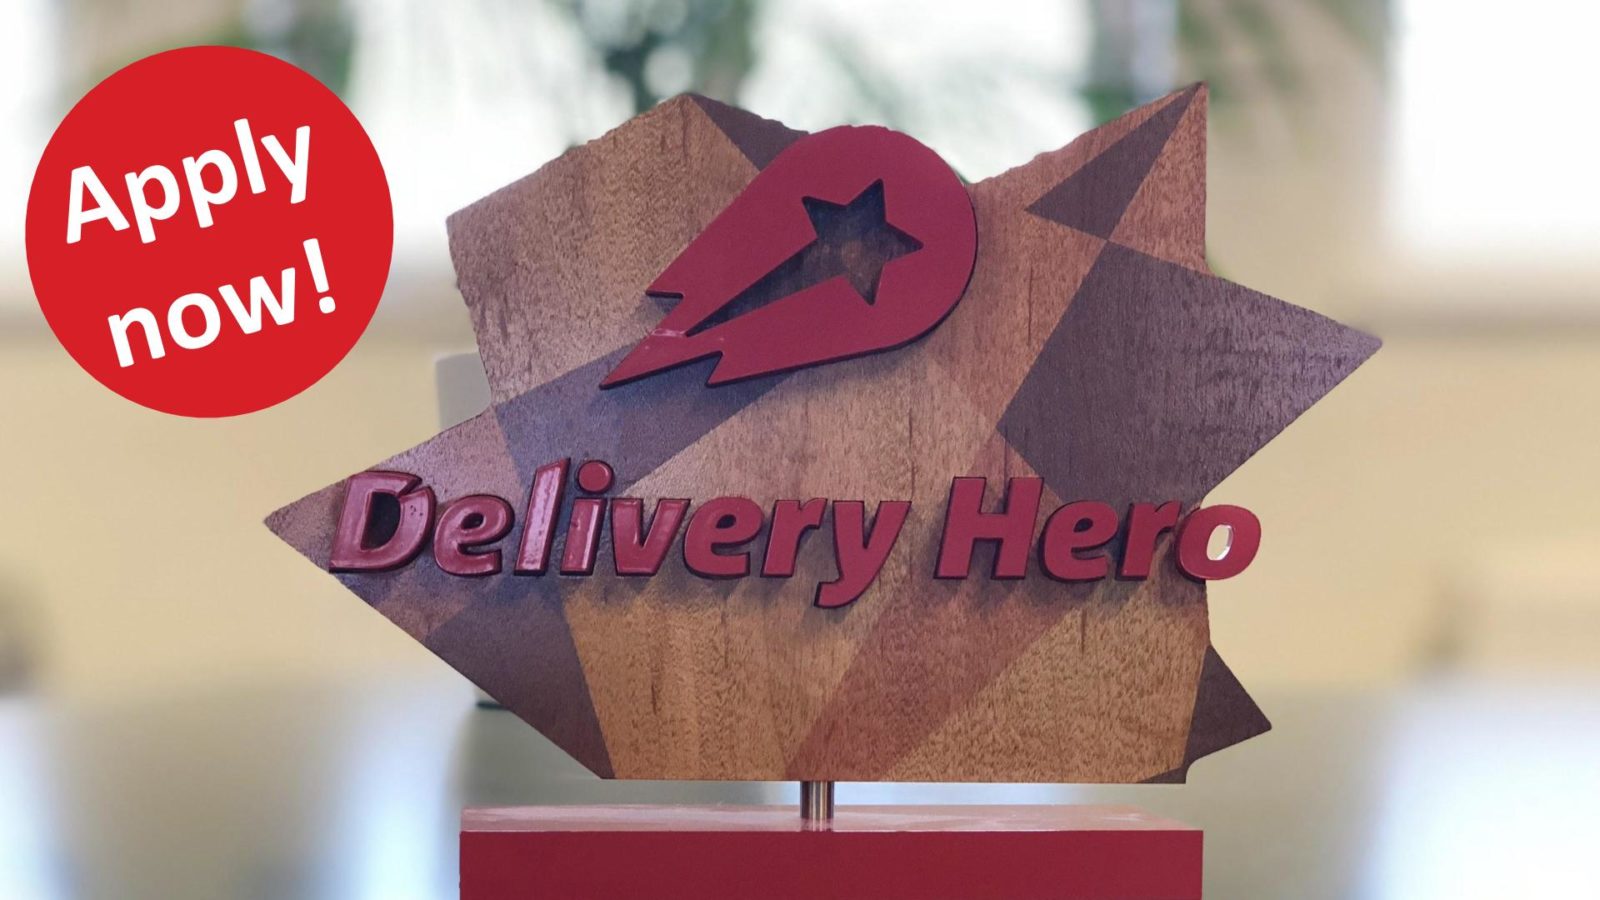 Hero Award 2018: supporting startups with a social mission